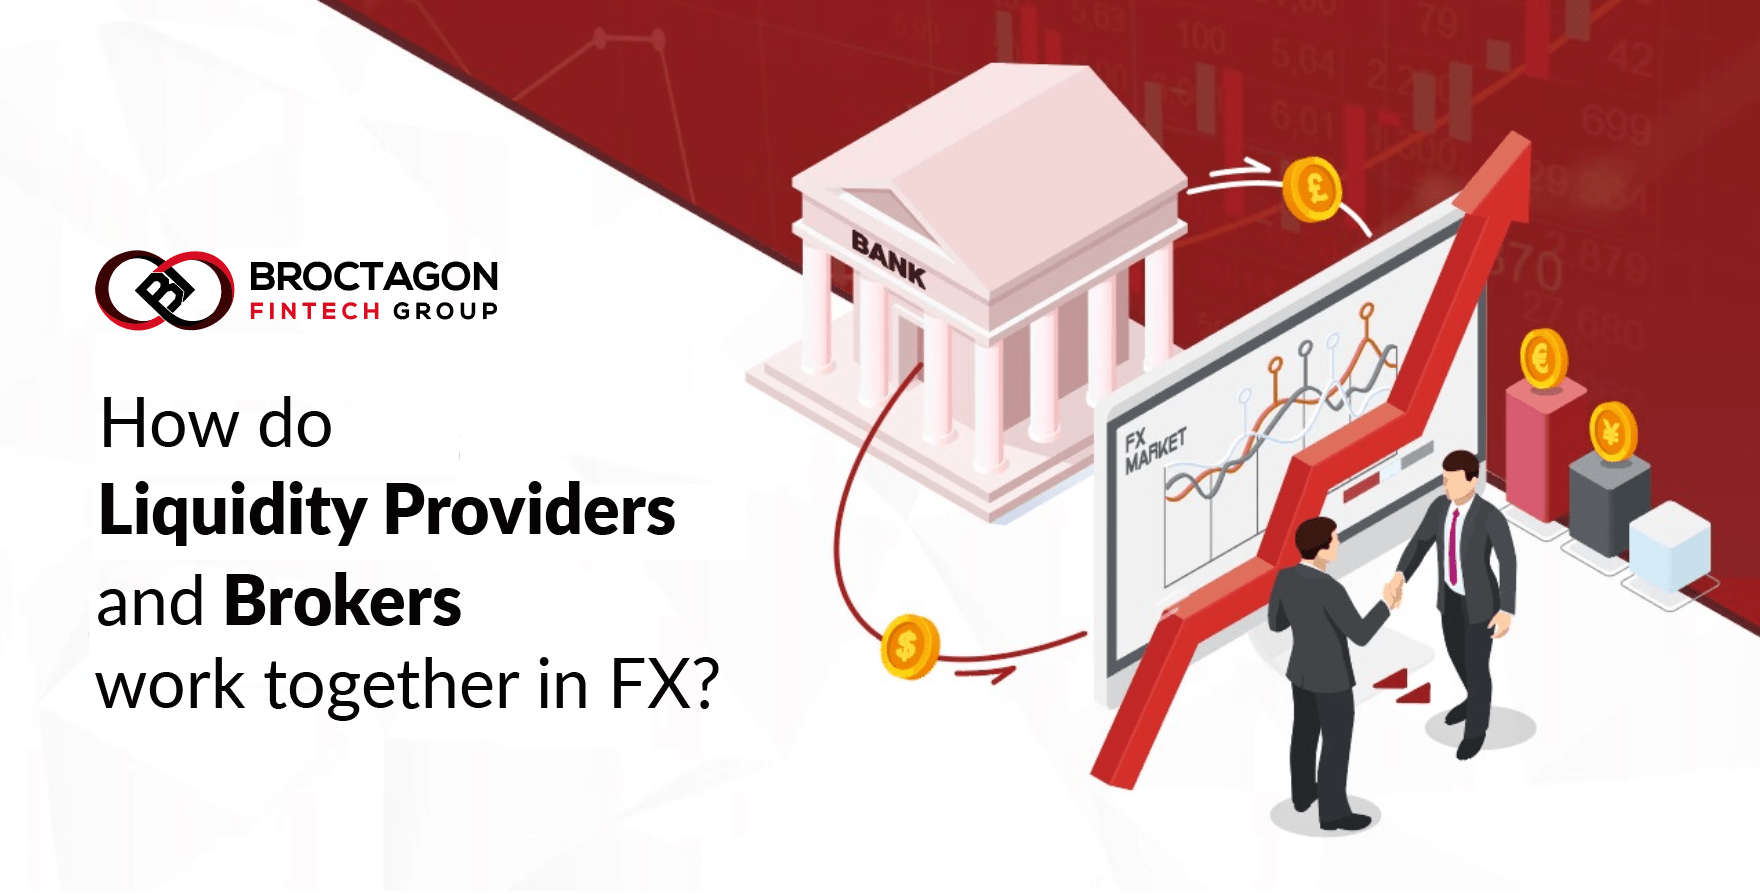 How do Liquidity Providers and Brokers work together in FX